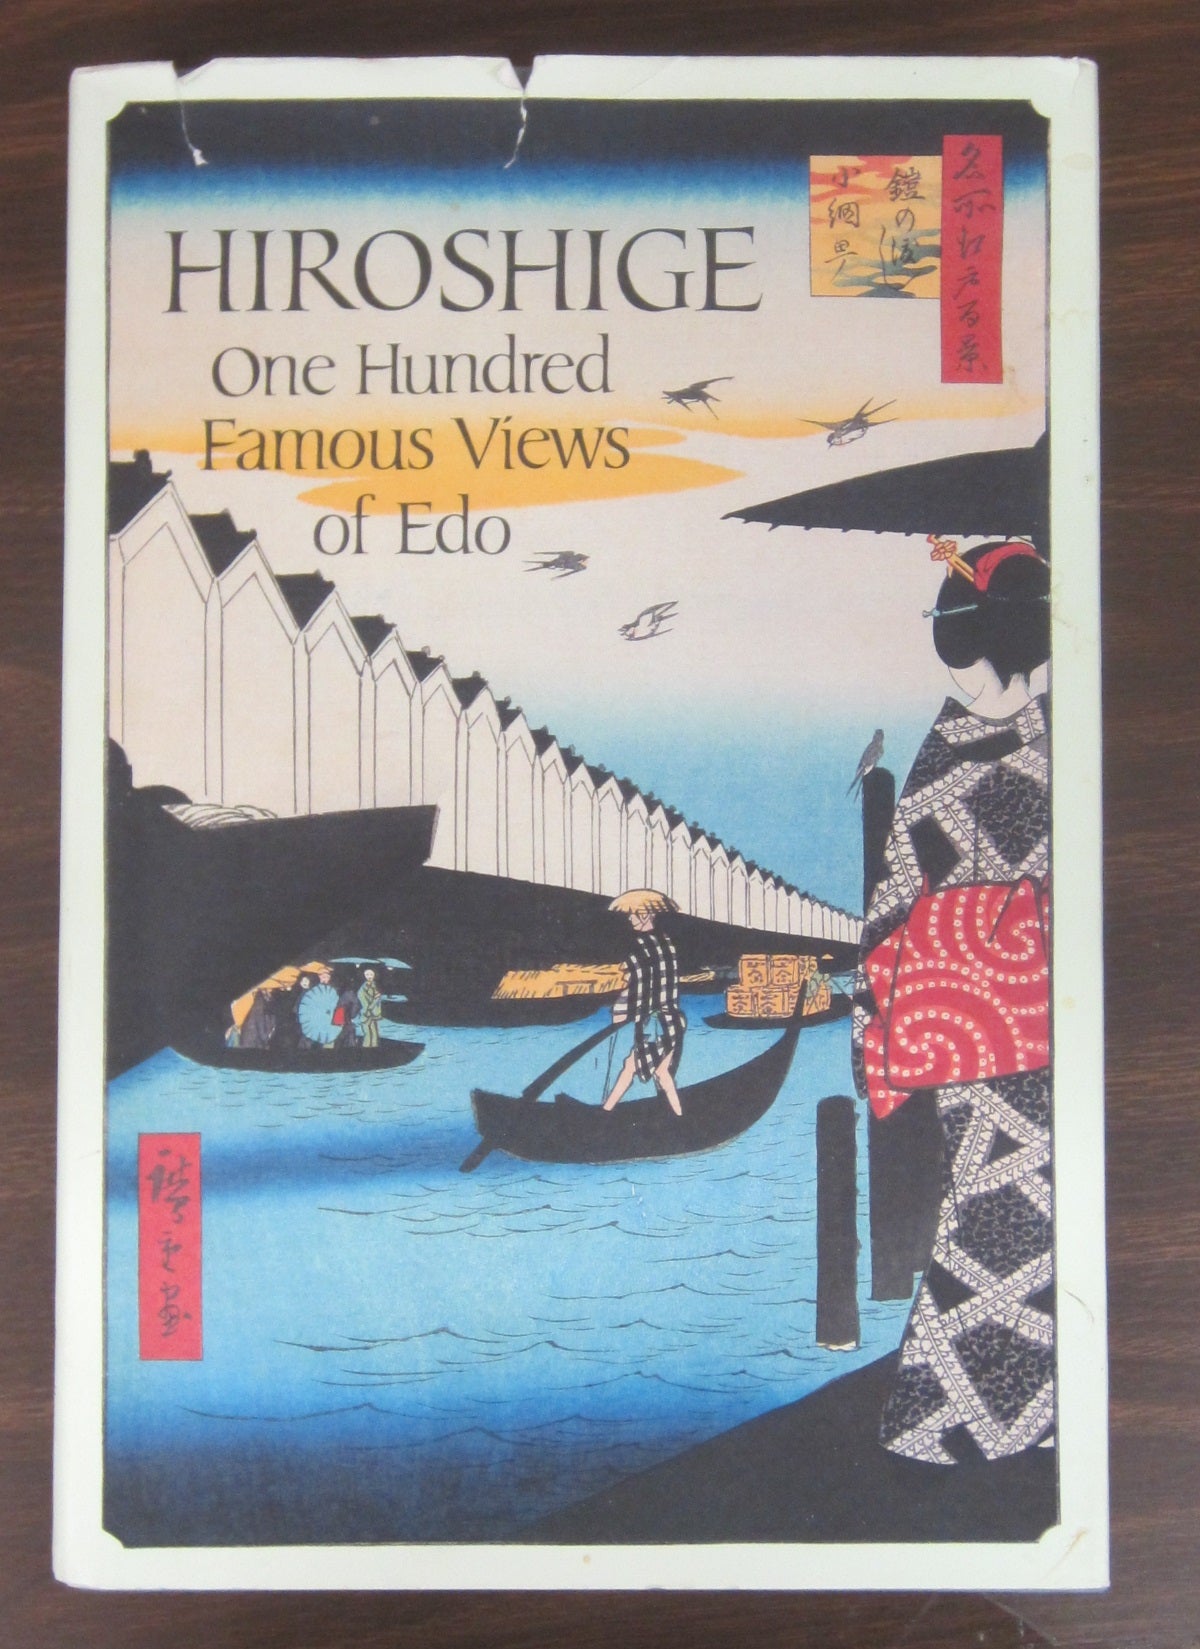 Hiroshige: One Hundred Famous Views of Edo by Henry D. Smith II, Amy G.  Poster on Midway Book Store